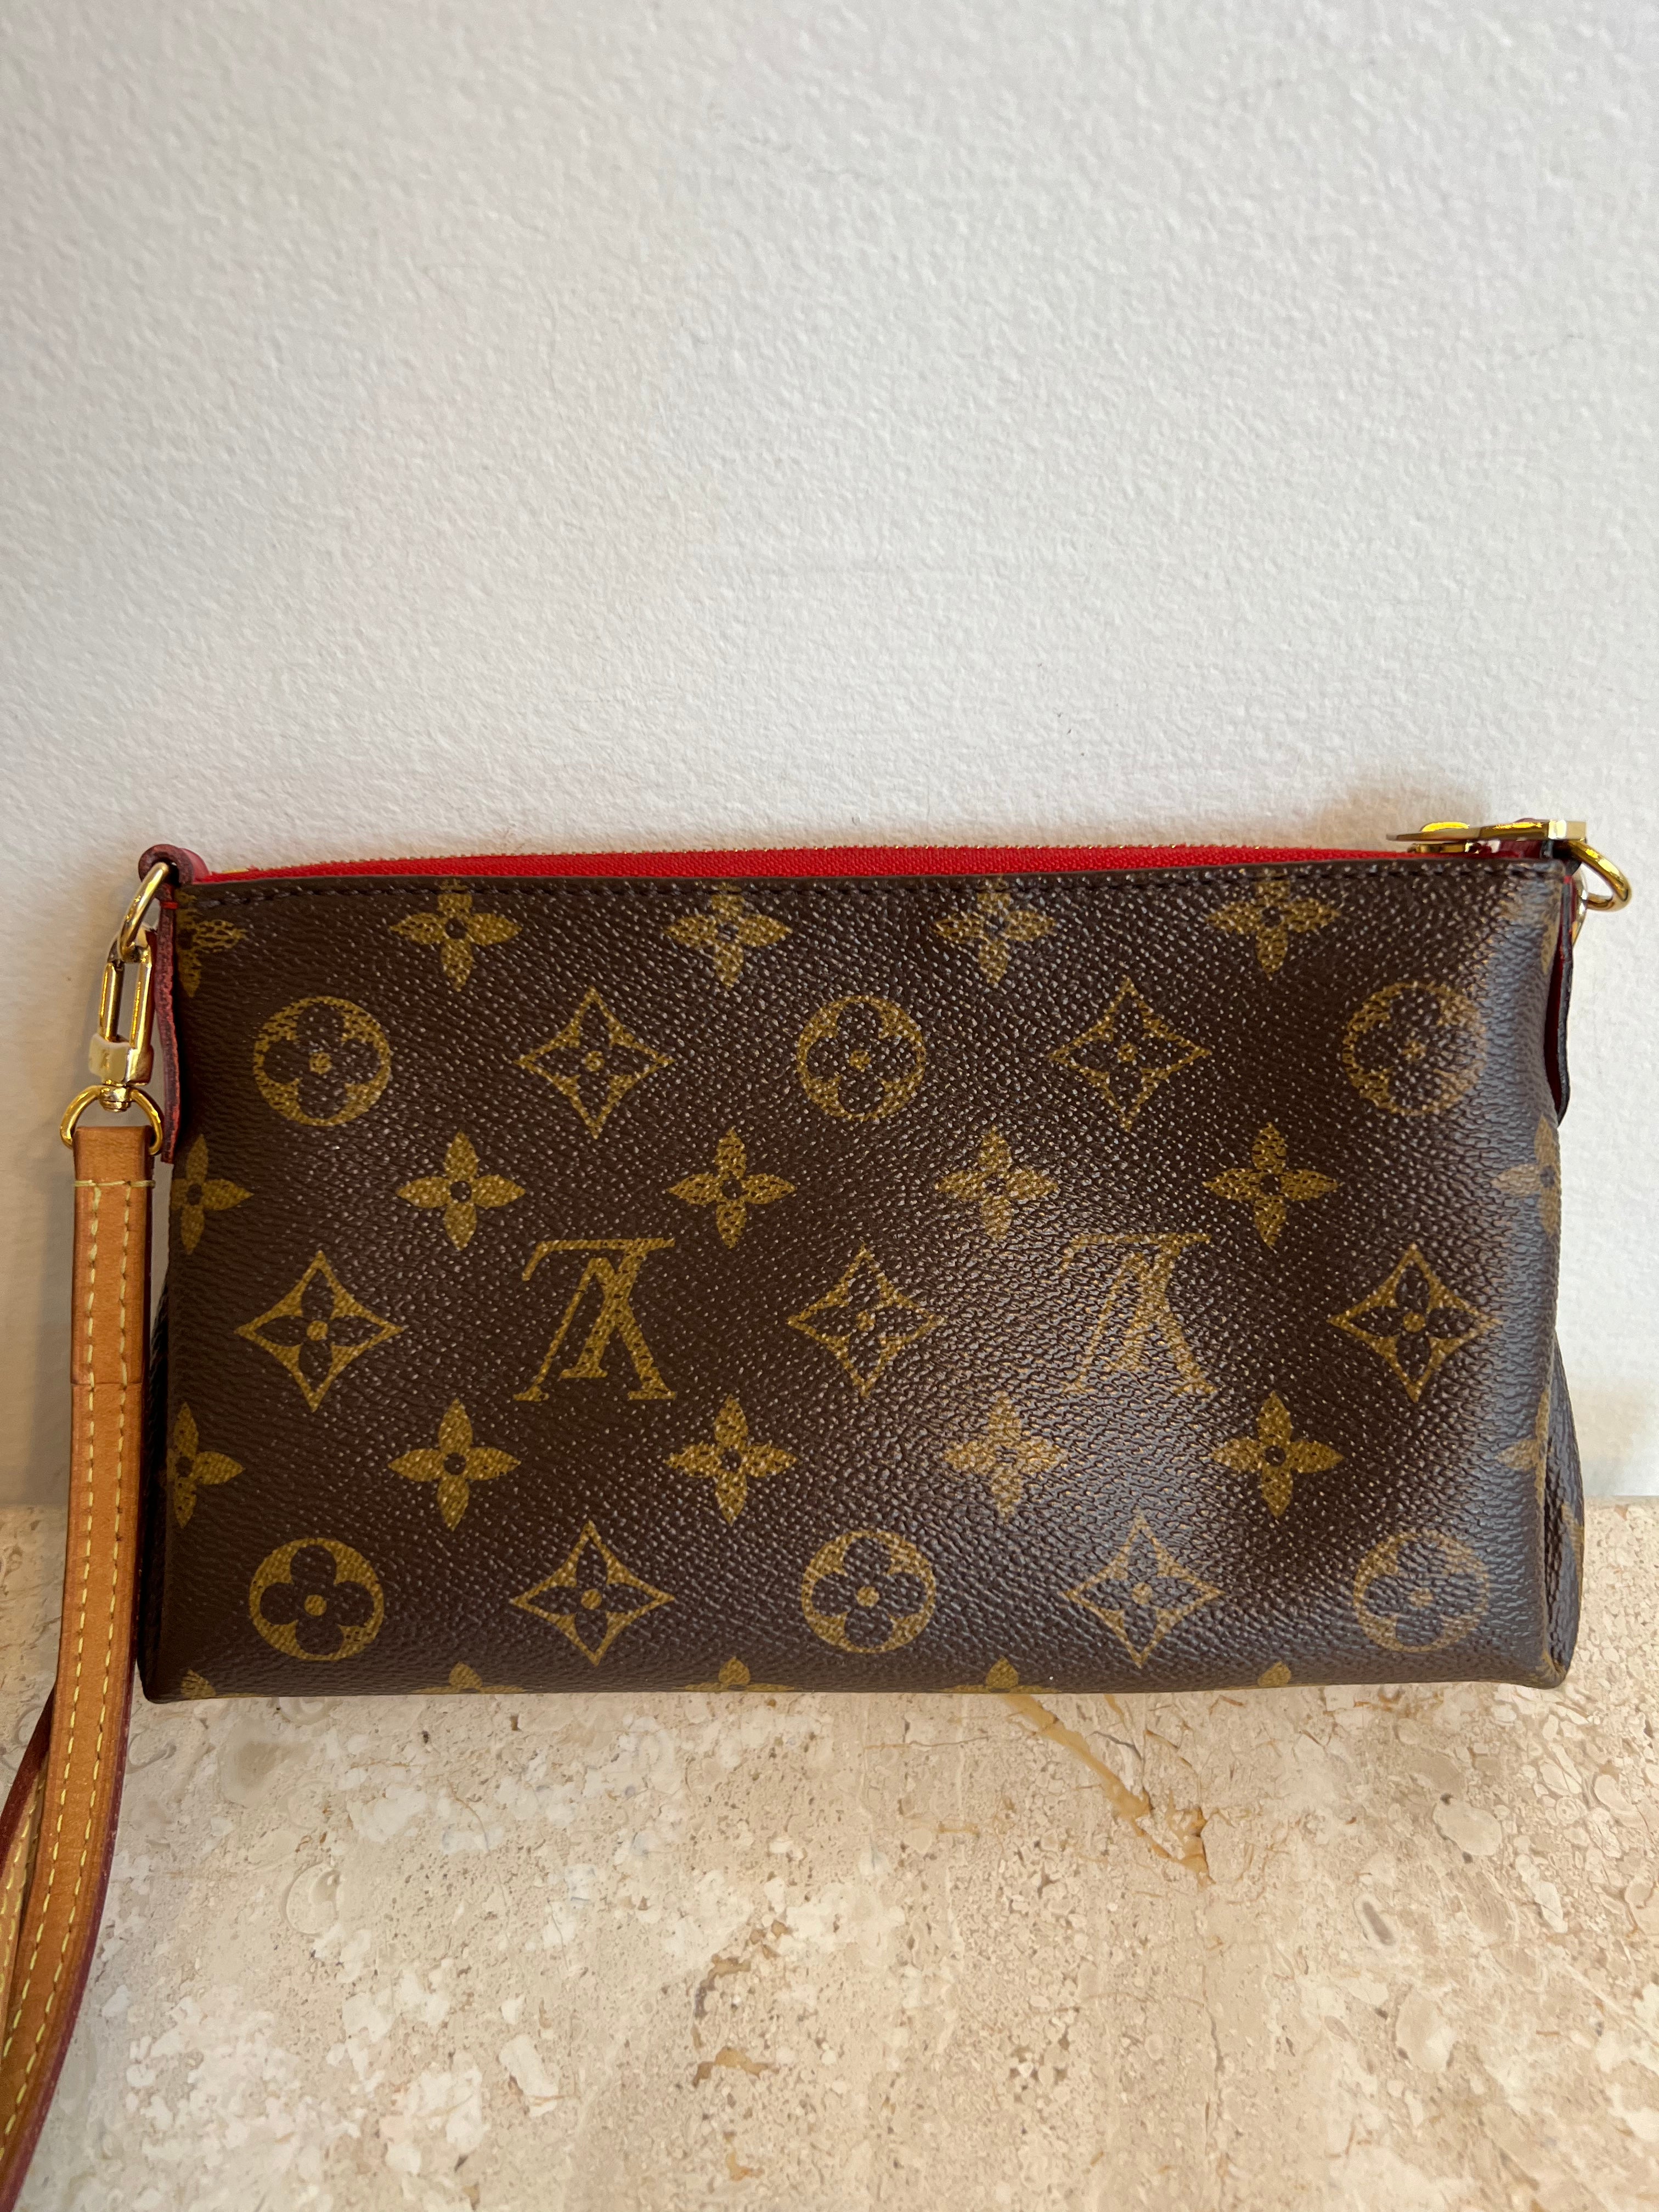 Louis Vuitton Neverfull Bags for sale in Singapore  Facebook Marketplace   Facebook